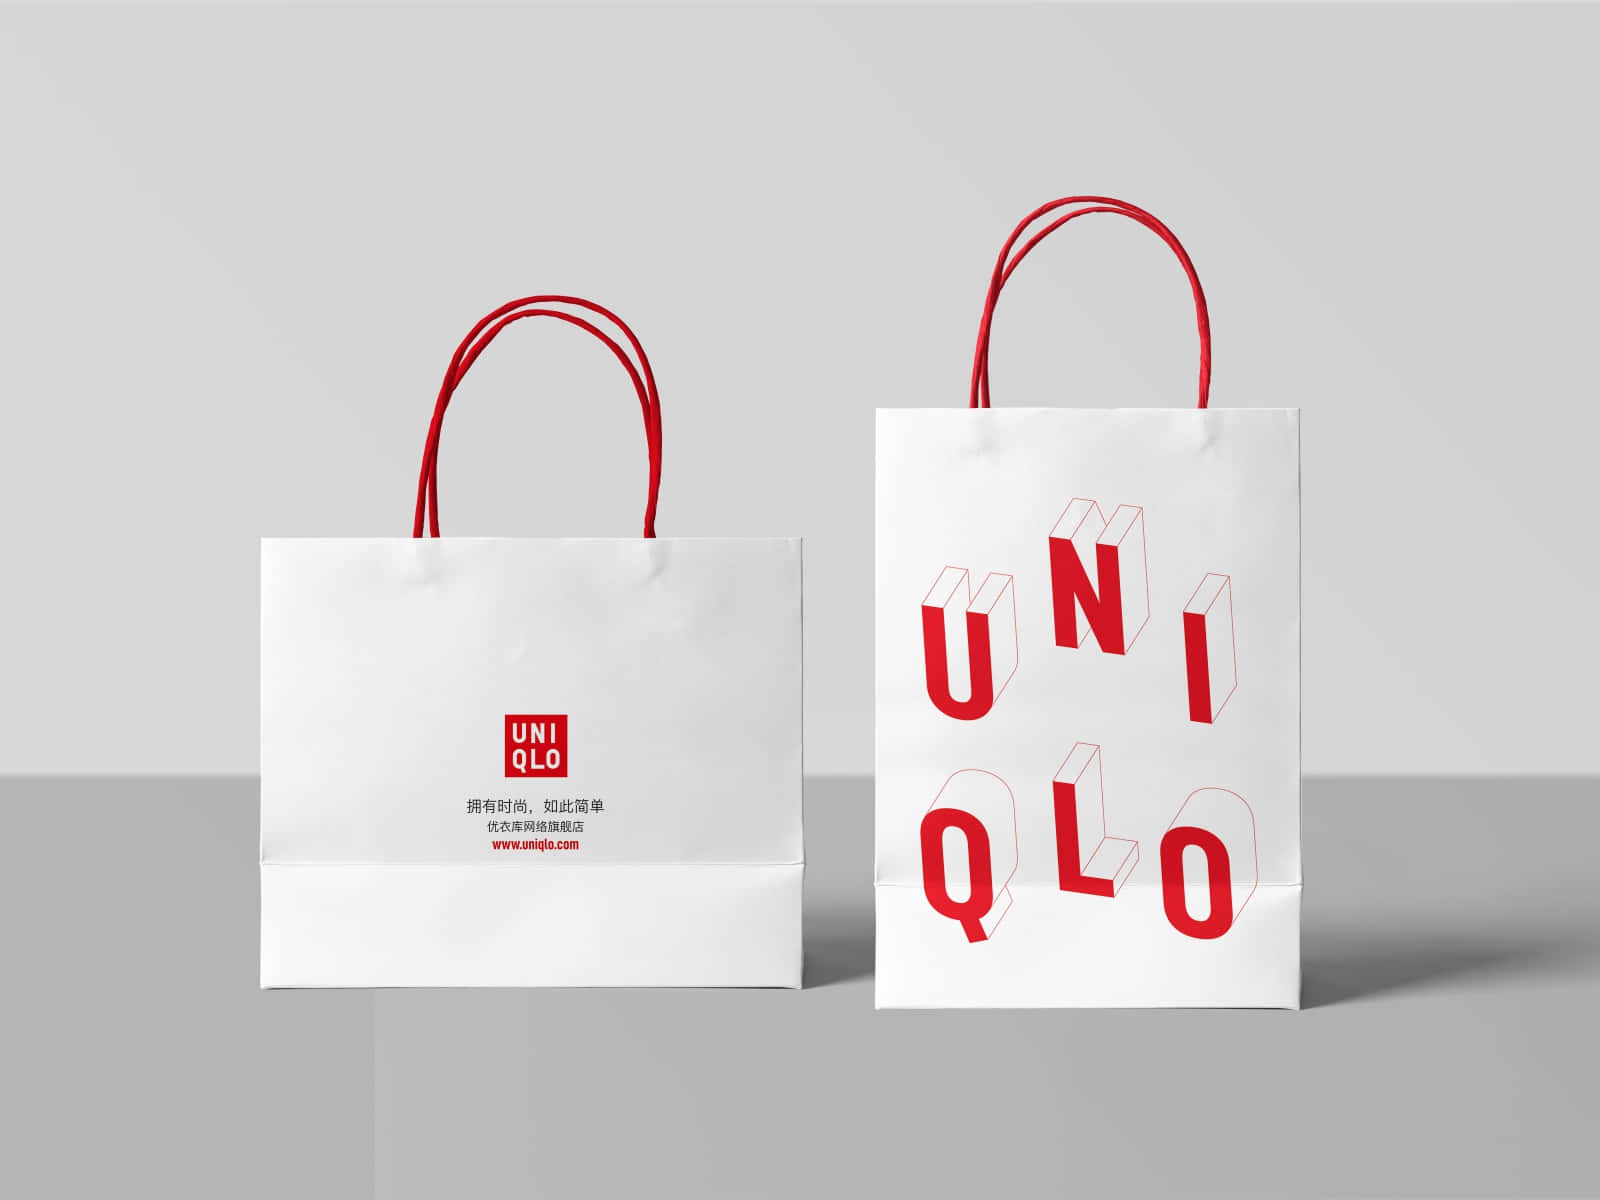 Download Uniqlo Background | Wallpapers.com